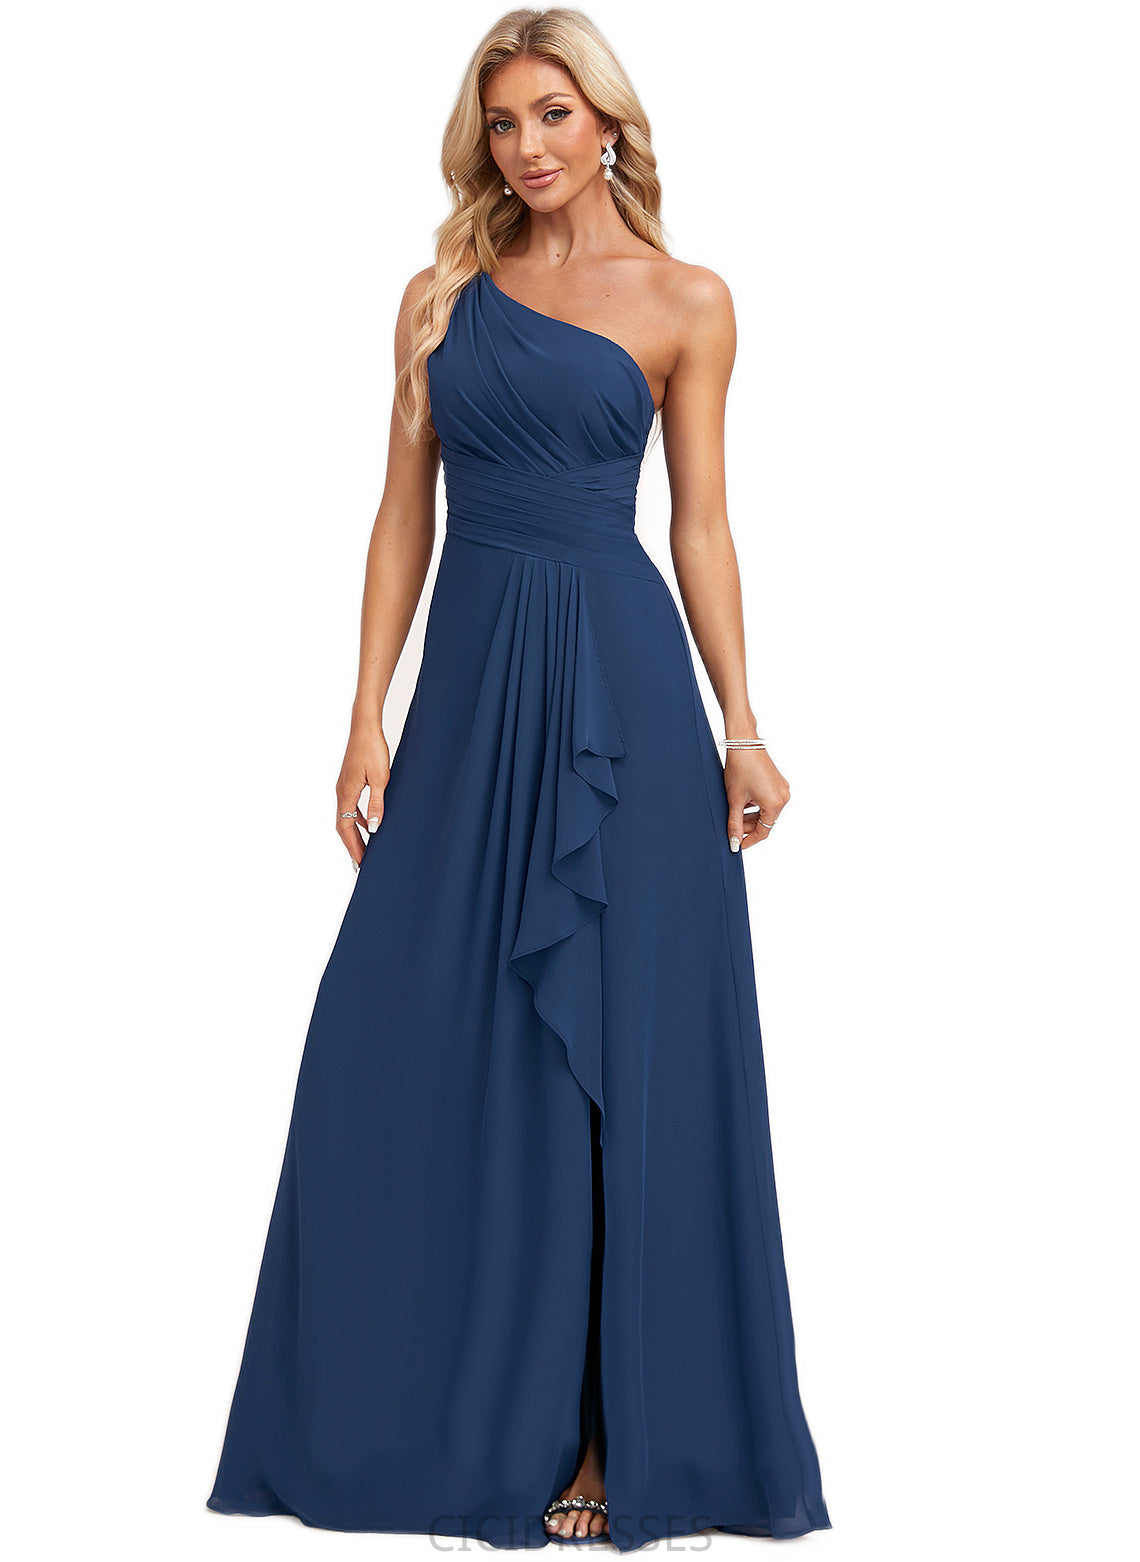 Amelie A-line One Shoulder Floor-Length Chiffon Bridesmaid Dress With Ruffle CIC8P0022581